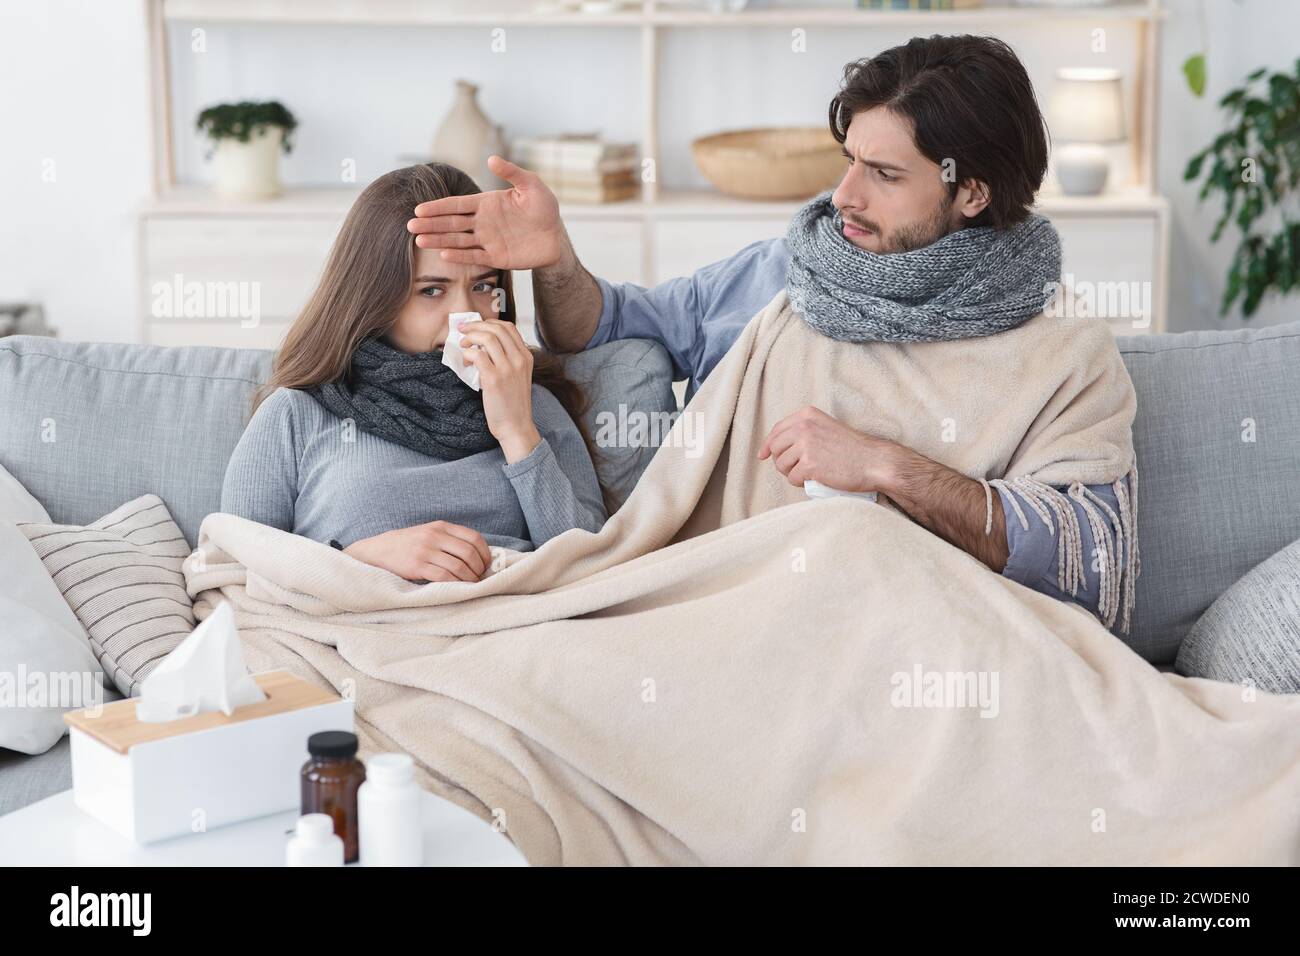 Sick couple covered in blanket sitting on couch, having fever Stock Photo